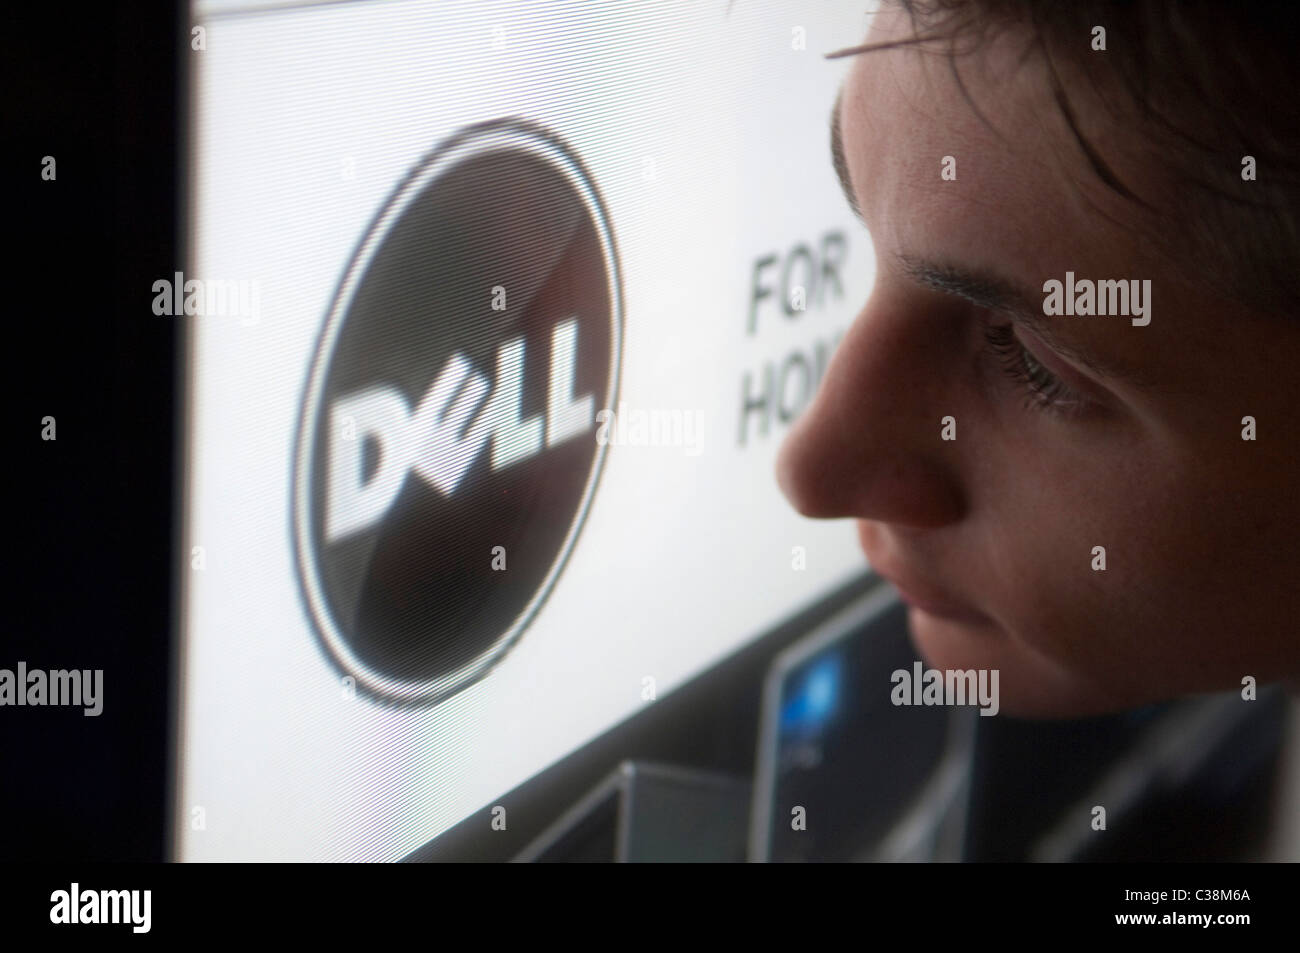 Illustrative image of the Dell website. Stock Photo